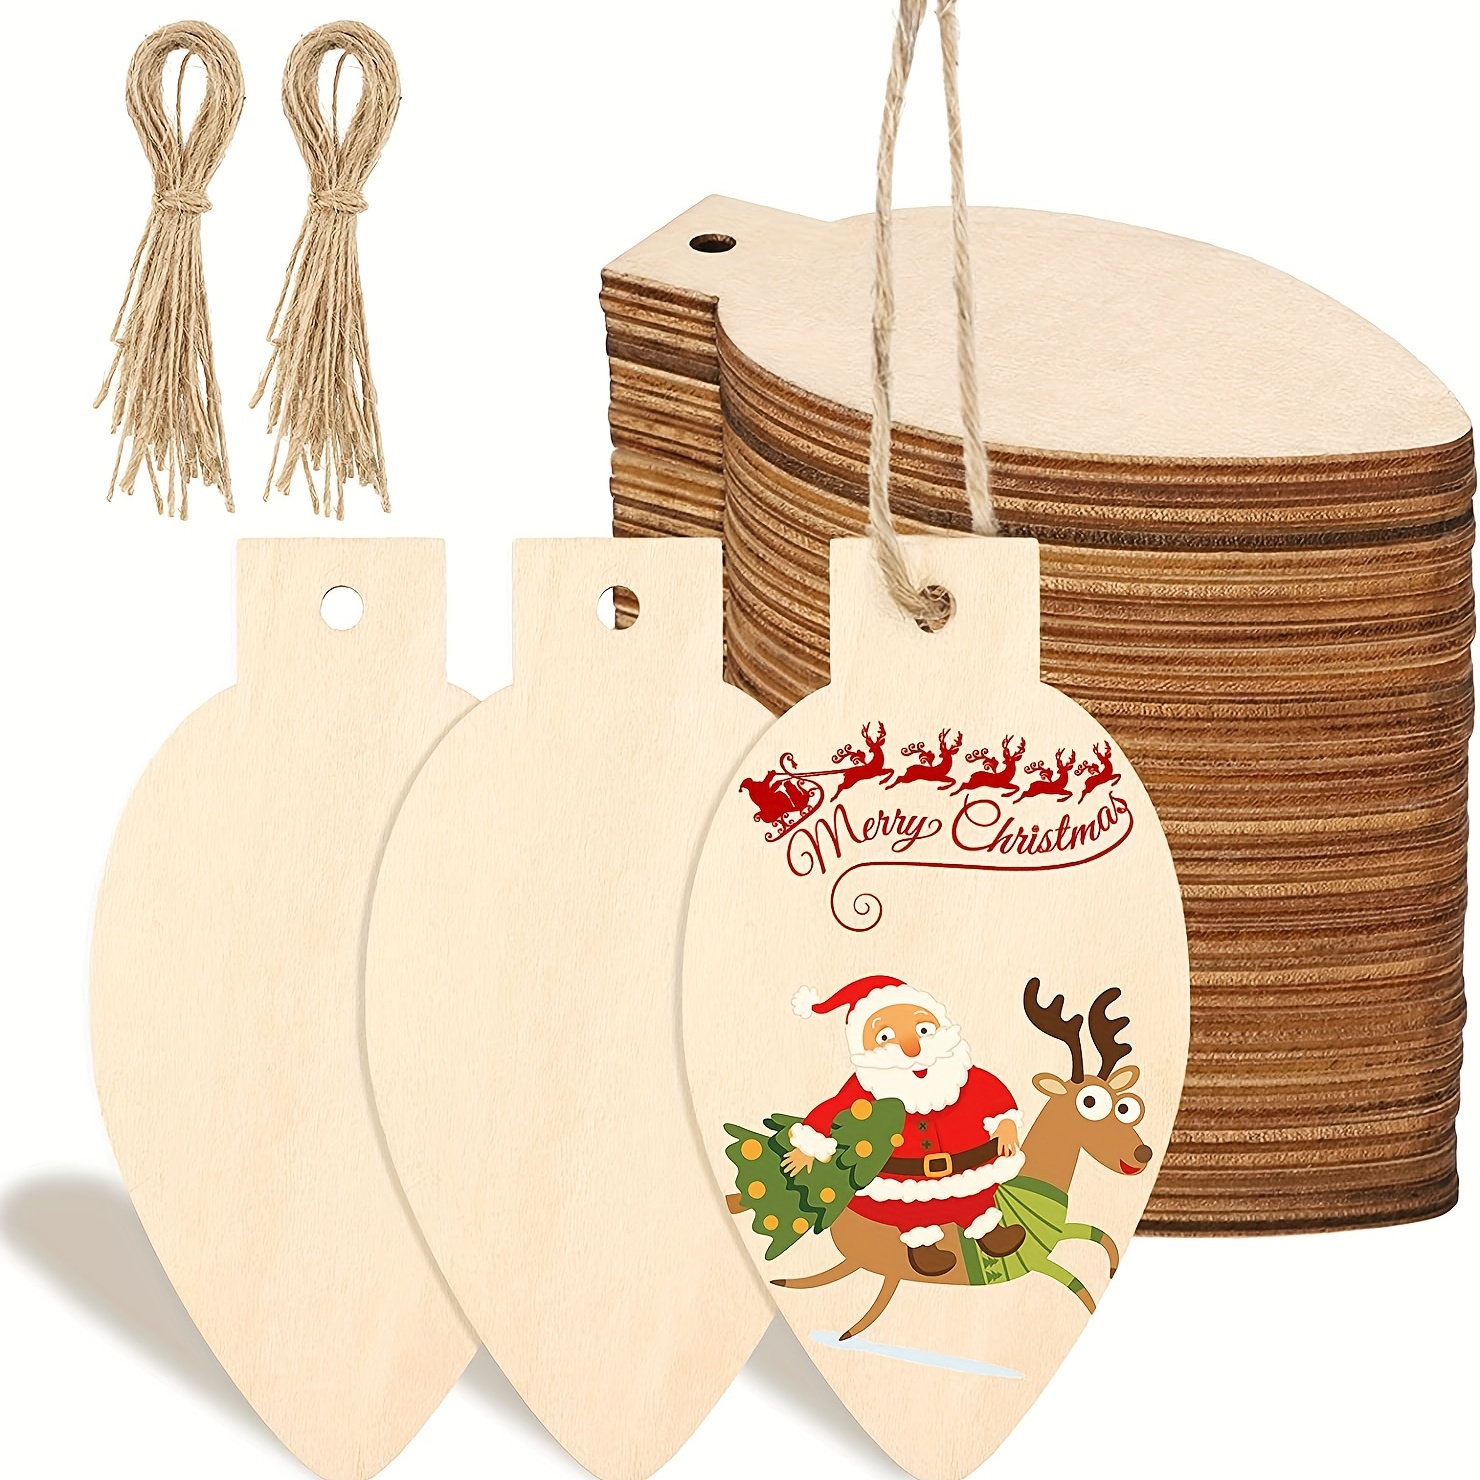 Wooden Discs, Unfinished Wooden Discs For Crafts, Diy Wooden